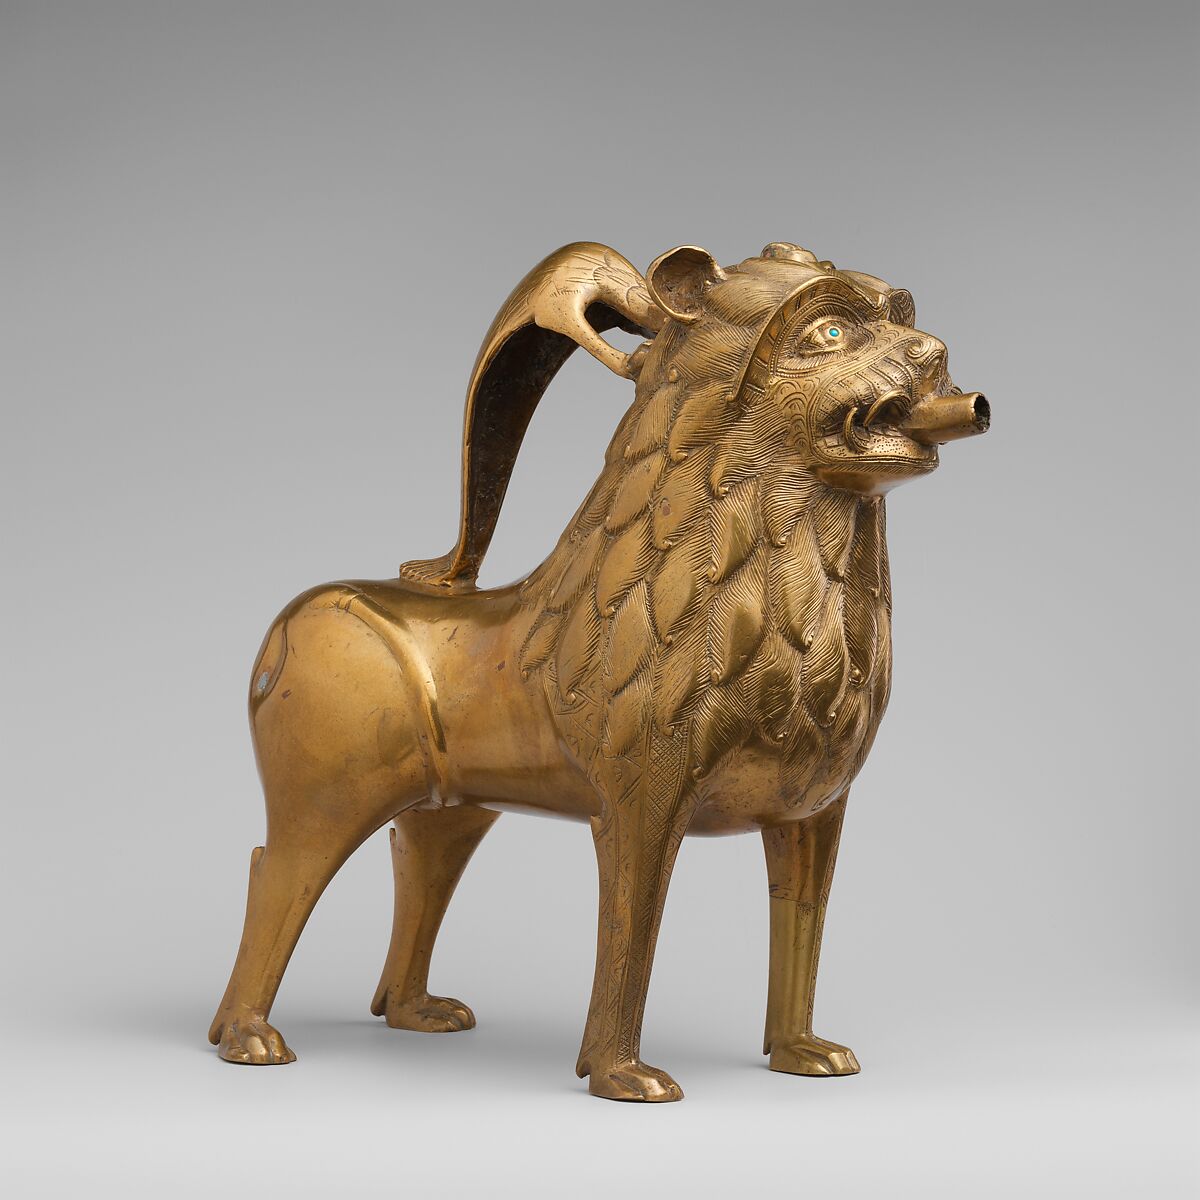 Aquamanile in the Form of a Lion, Copper alloy with inlaid glass, North German 